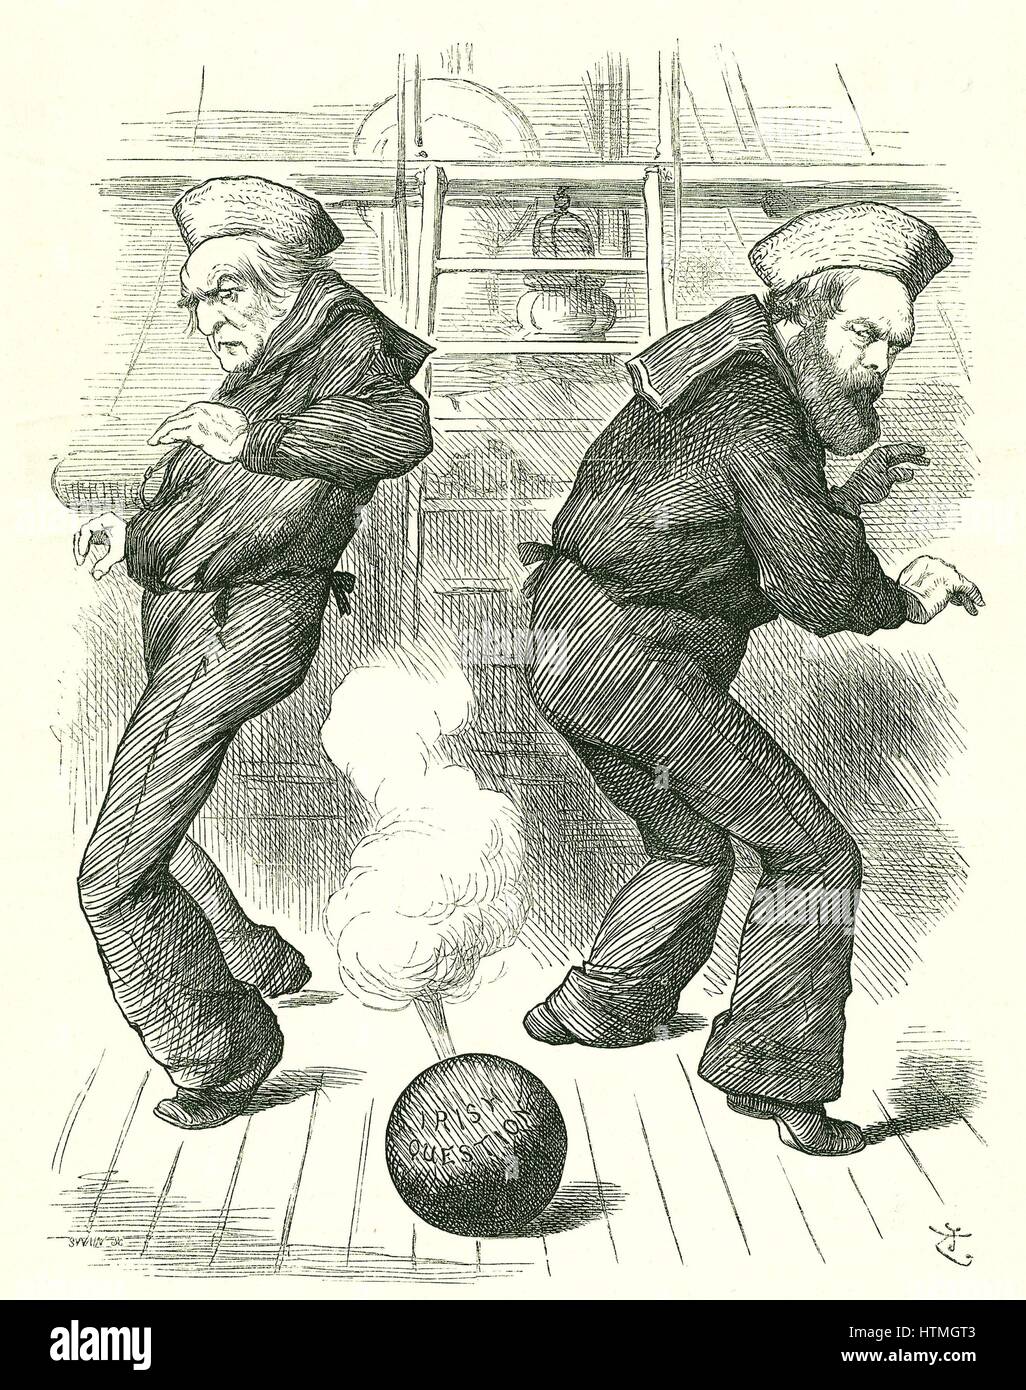 'The Live Shell': Salisbury's (right) administration resigned in January to be followed in February by the third Gladstone (left) administration. Neither politician relished dealing with the problems of Ireland. John Tenniel cartoon from 'Punch', London, 30 January 1886. Stock Photo